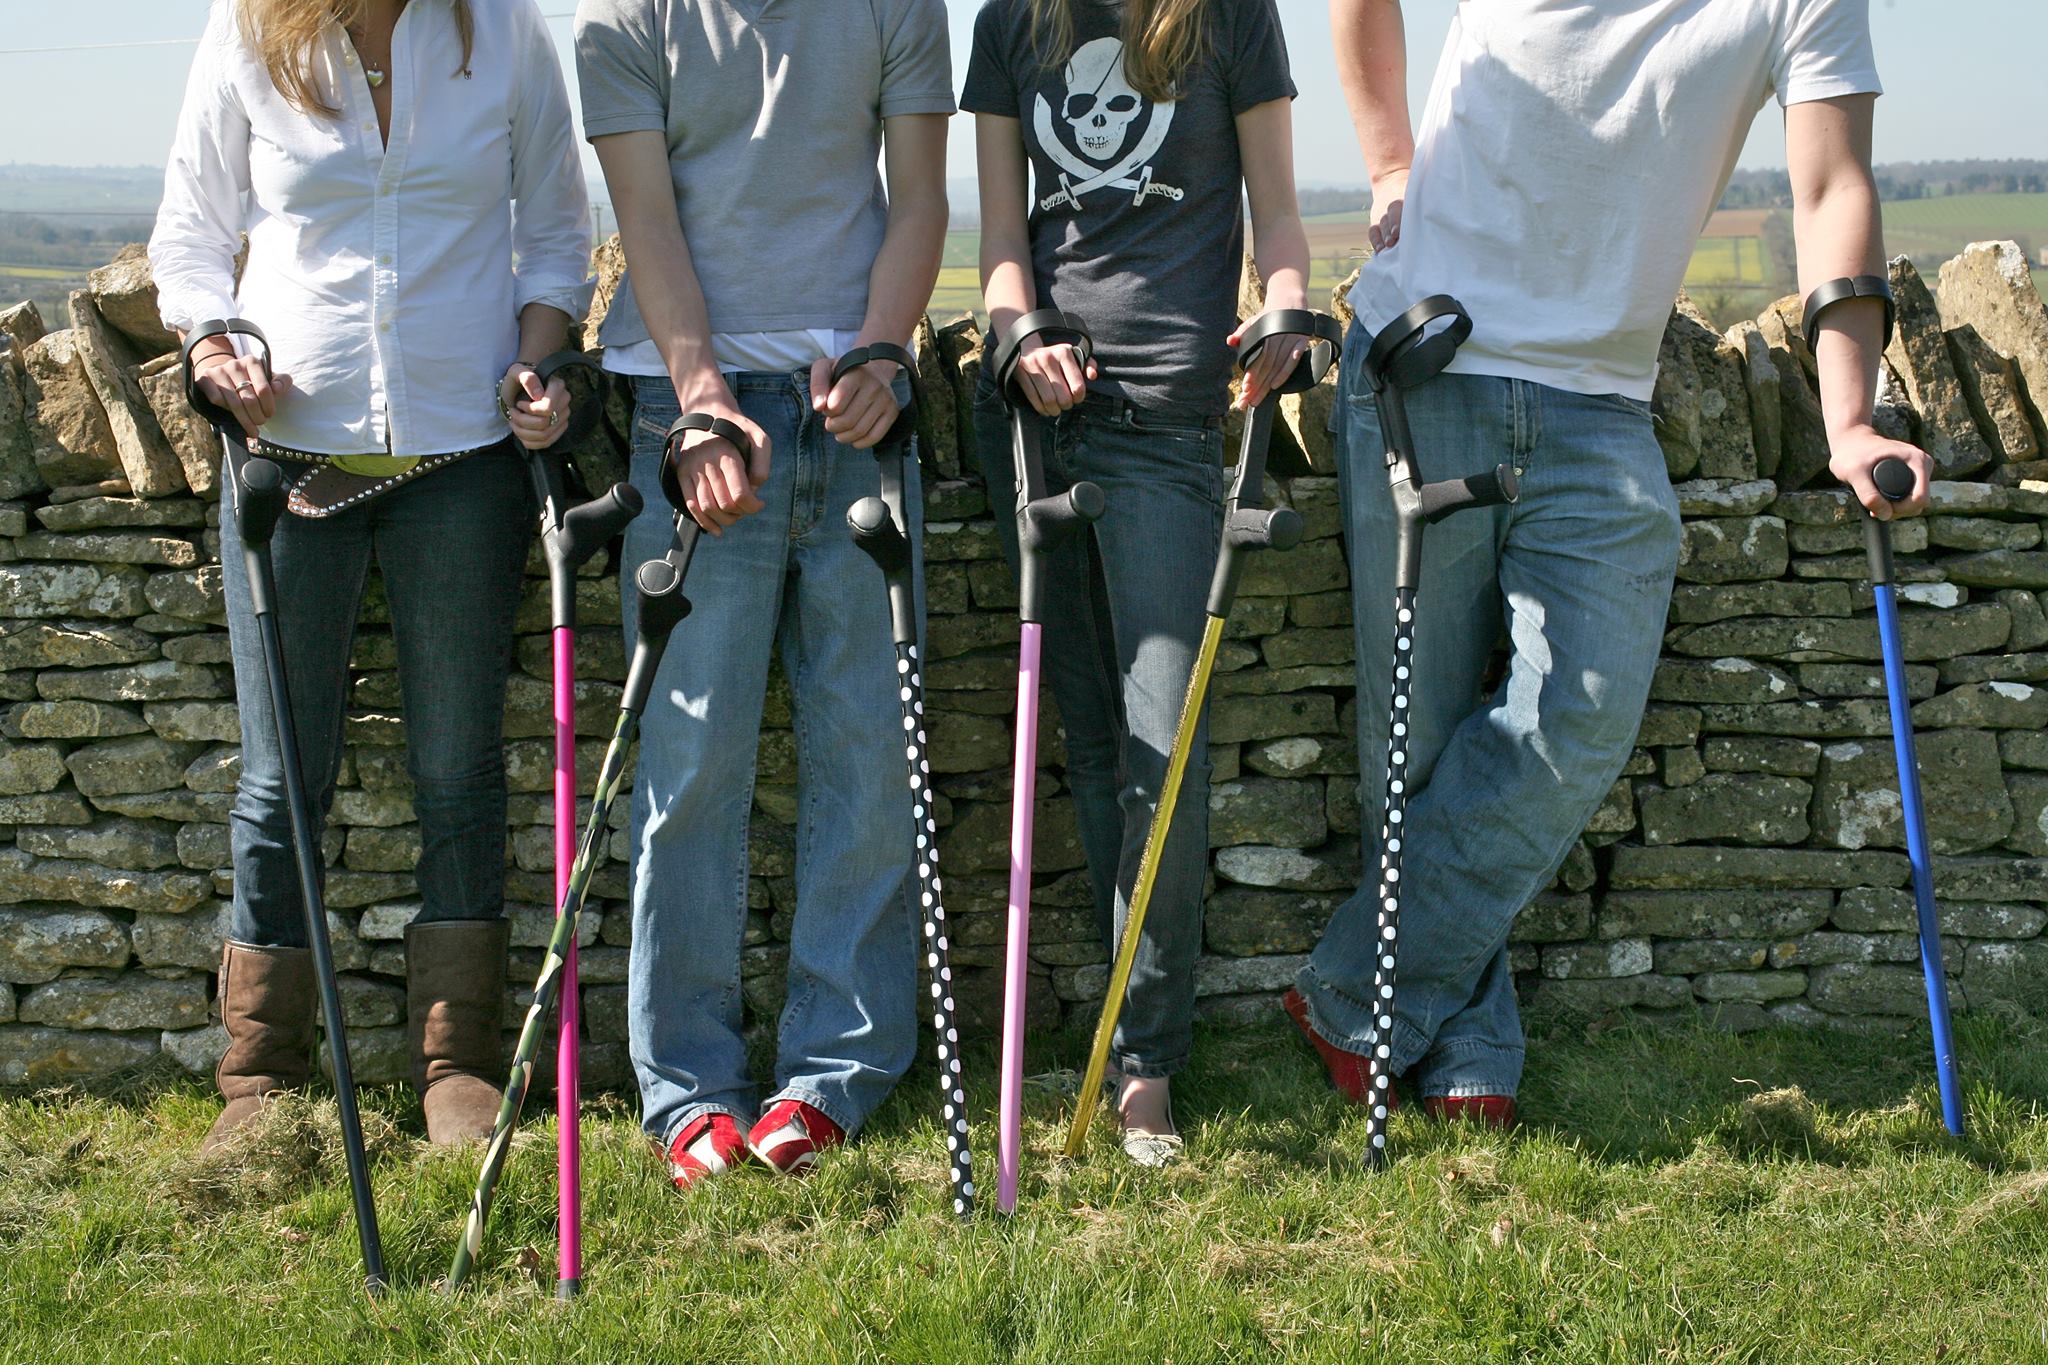 get_the_best_Crutches_ad